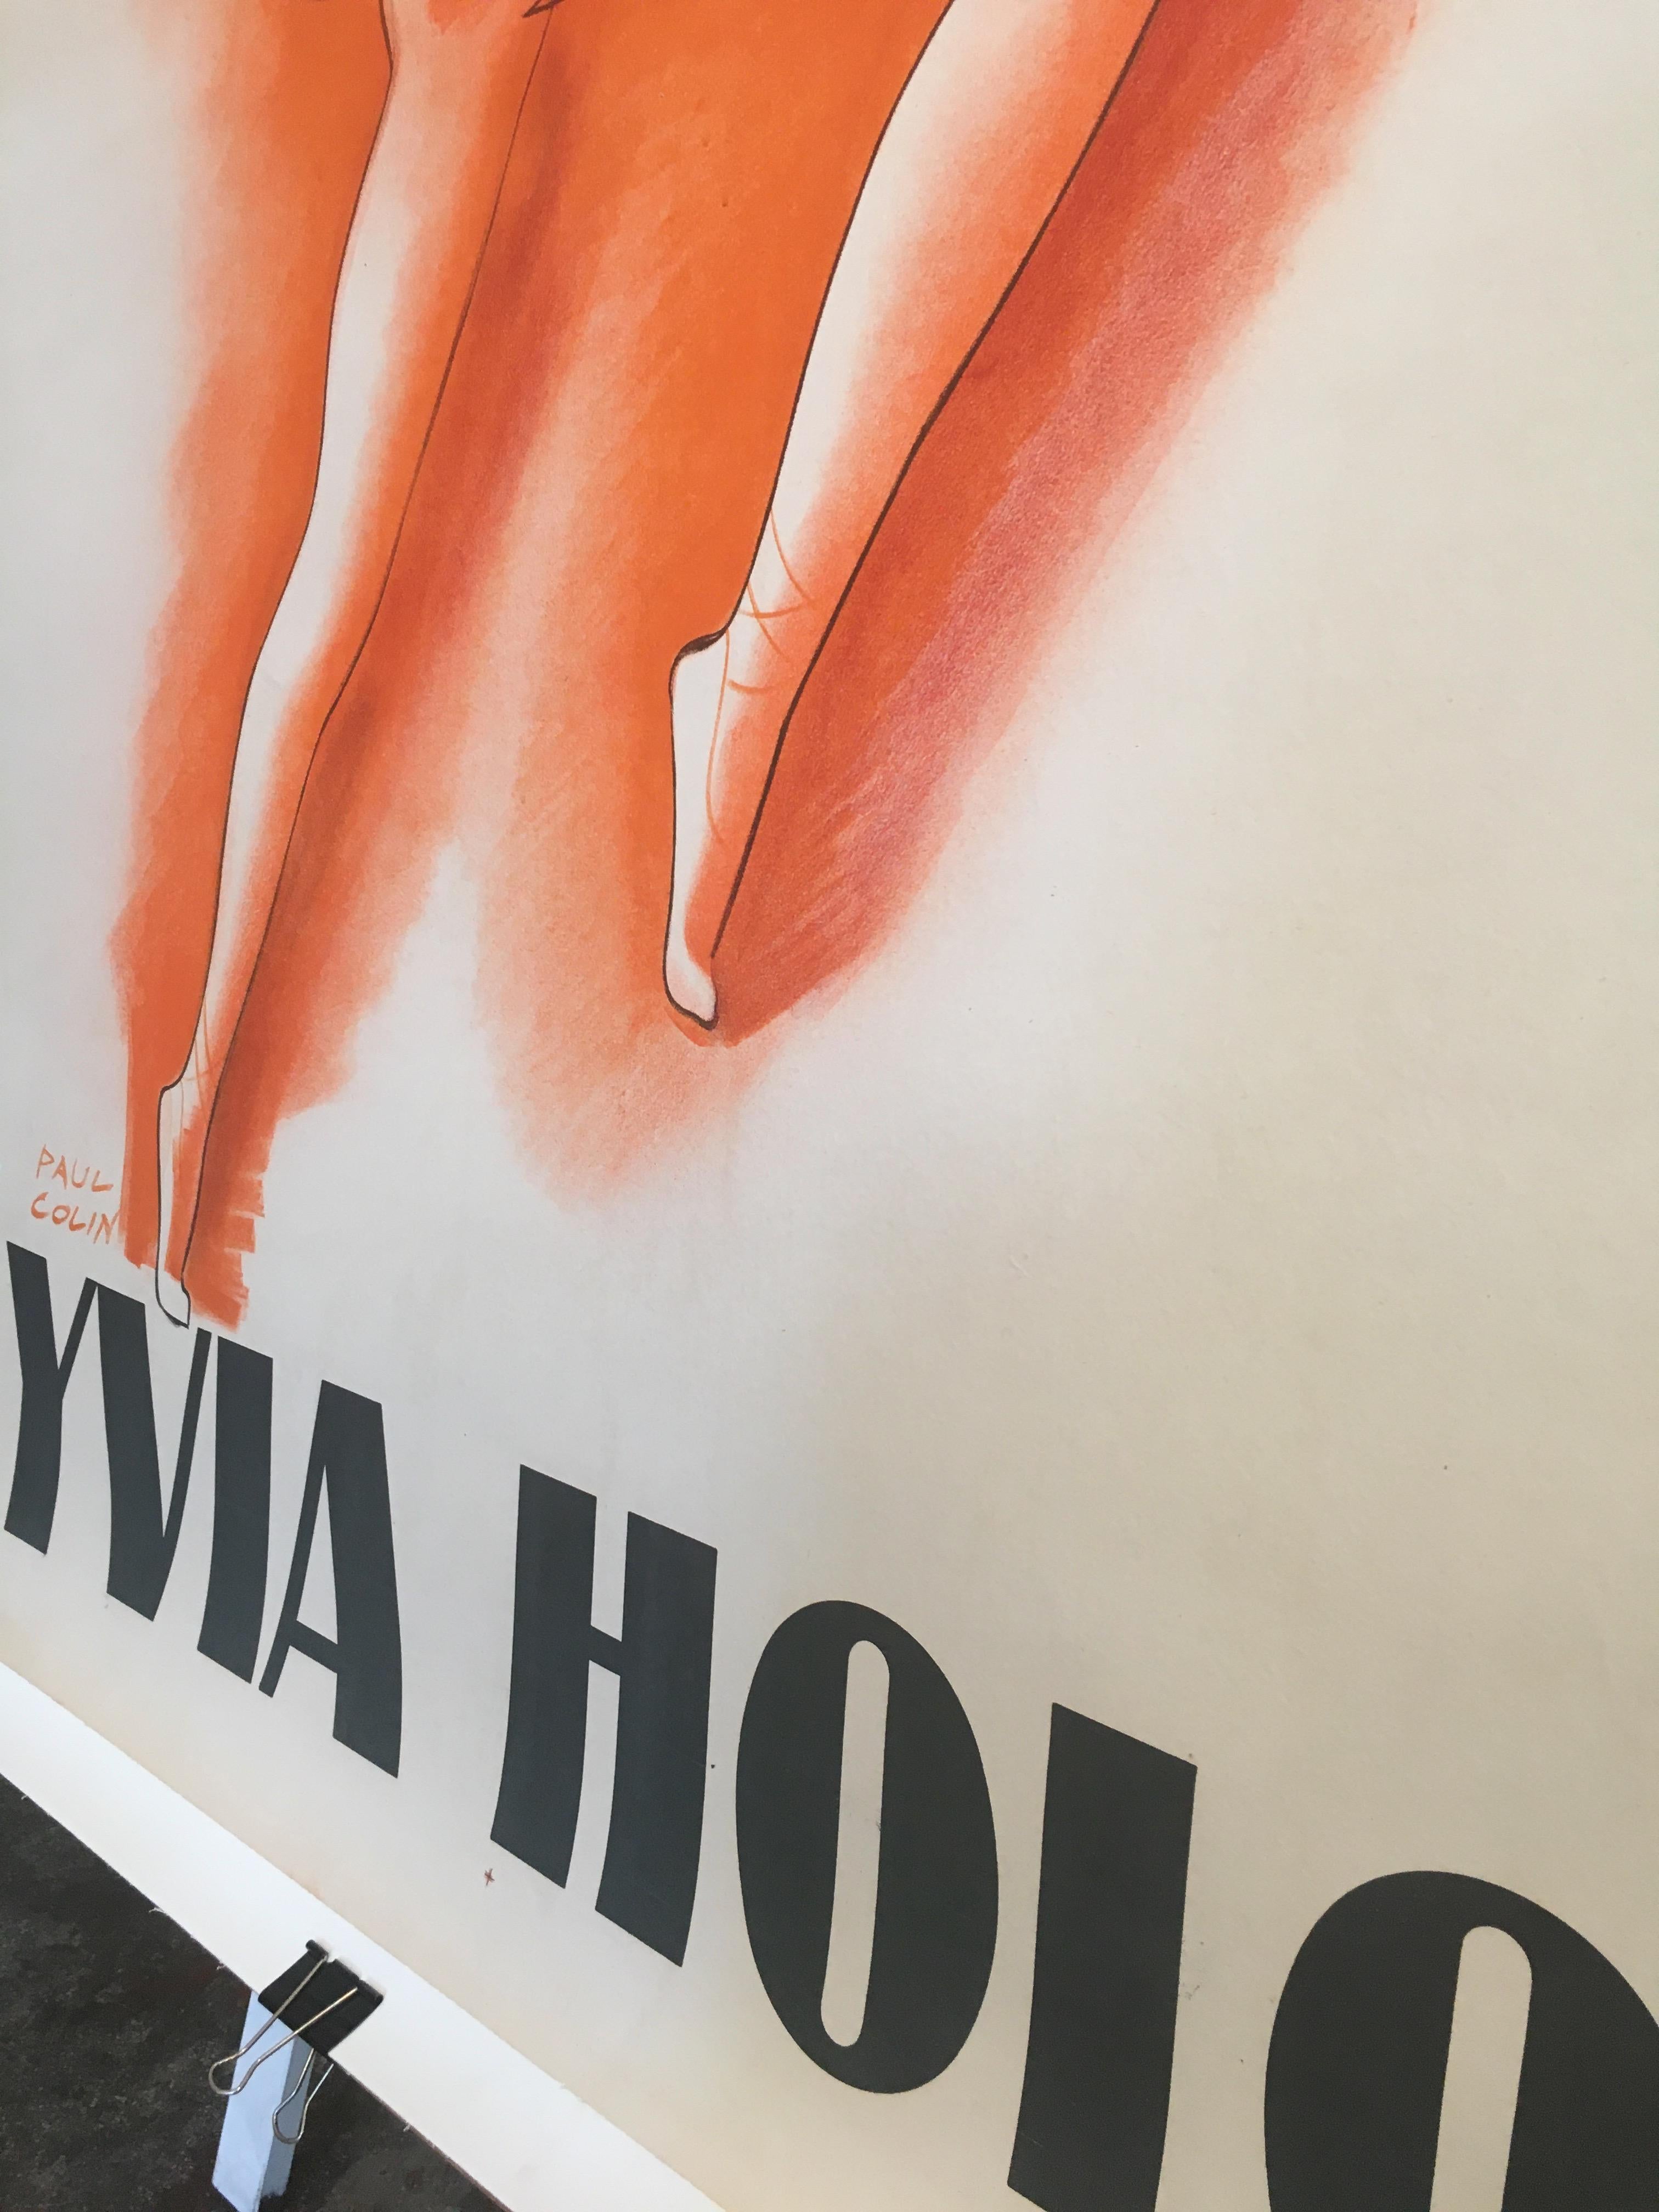 Art Deco Mid-20th Century Original Vintage French Poster, 'Lyvia Holos' by Jean Colin For Sale